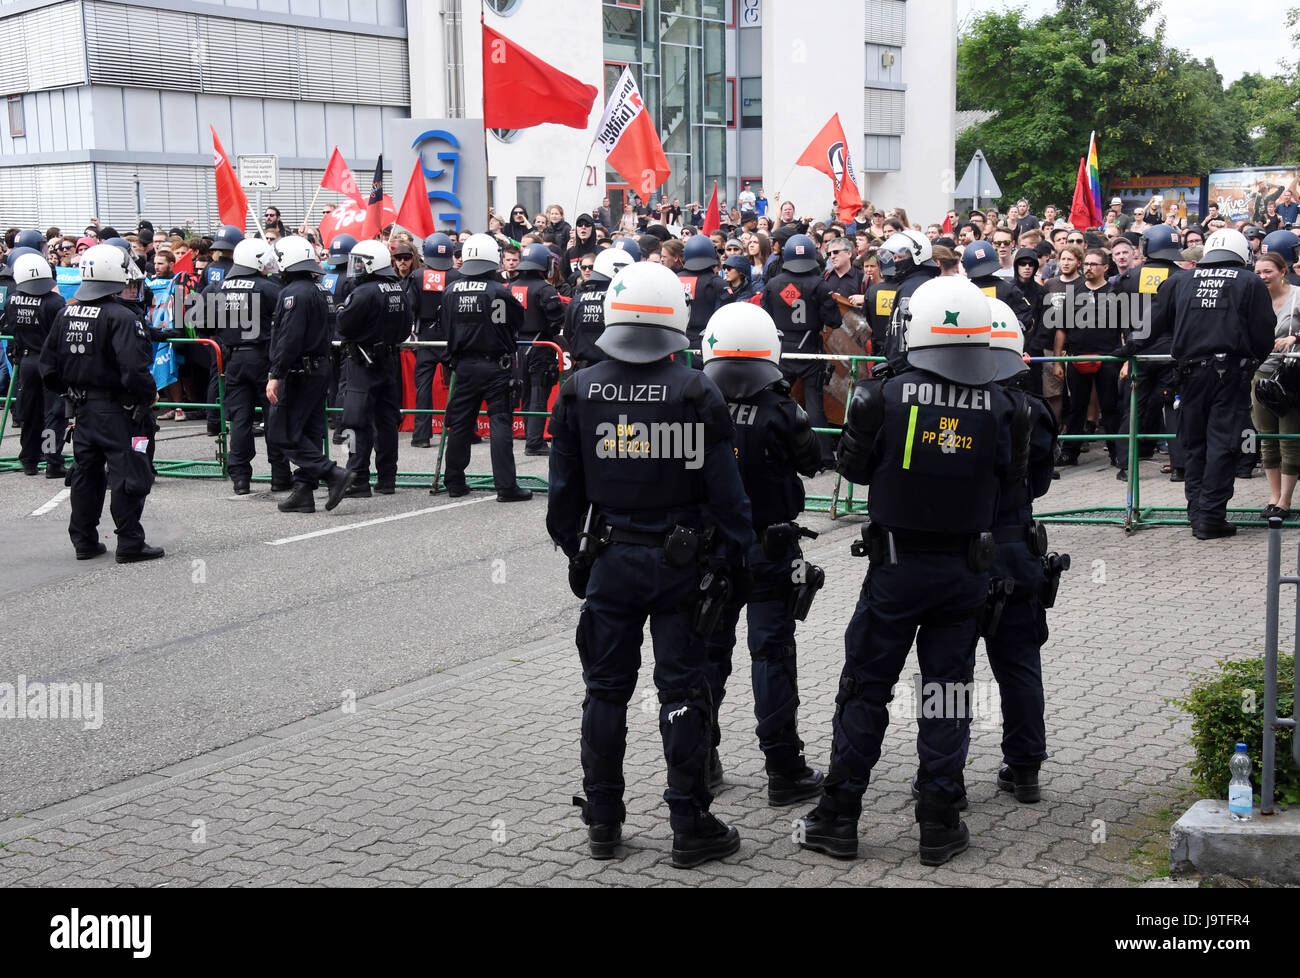 Karlsruhe, Germany. 3rd June, 2017. Policemen seperate a leftist protest and a rightist demonstration in the district of Durlach in in Karlsruhe, Germany, 3 June 2017. The rightist party 'Die Rechte' called out for the 'Tag der deutschen Zukunft' (lit. 'Day of German future'). More than 6,000 participants are expected at multiple counter-demonstrations. Photo: Uli Deck/dpa/Alamy Live News Stock Photo